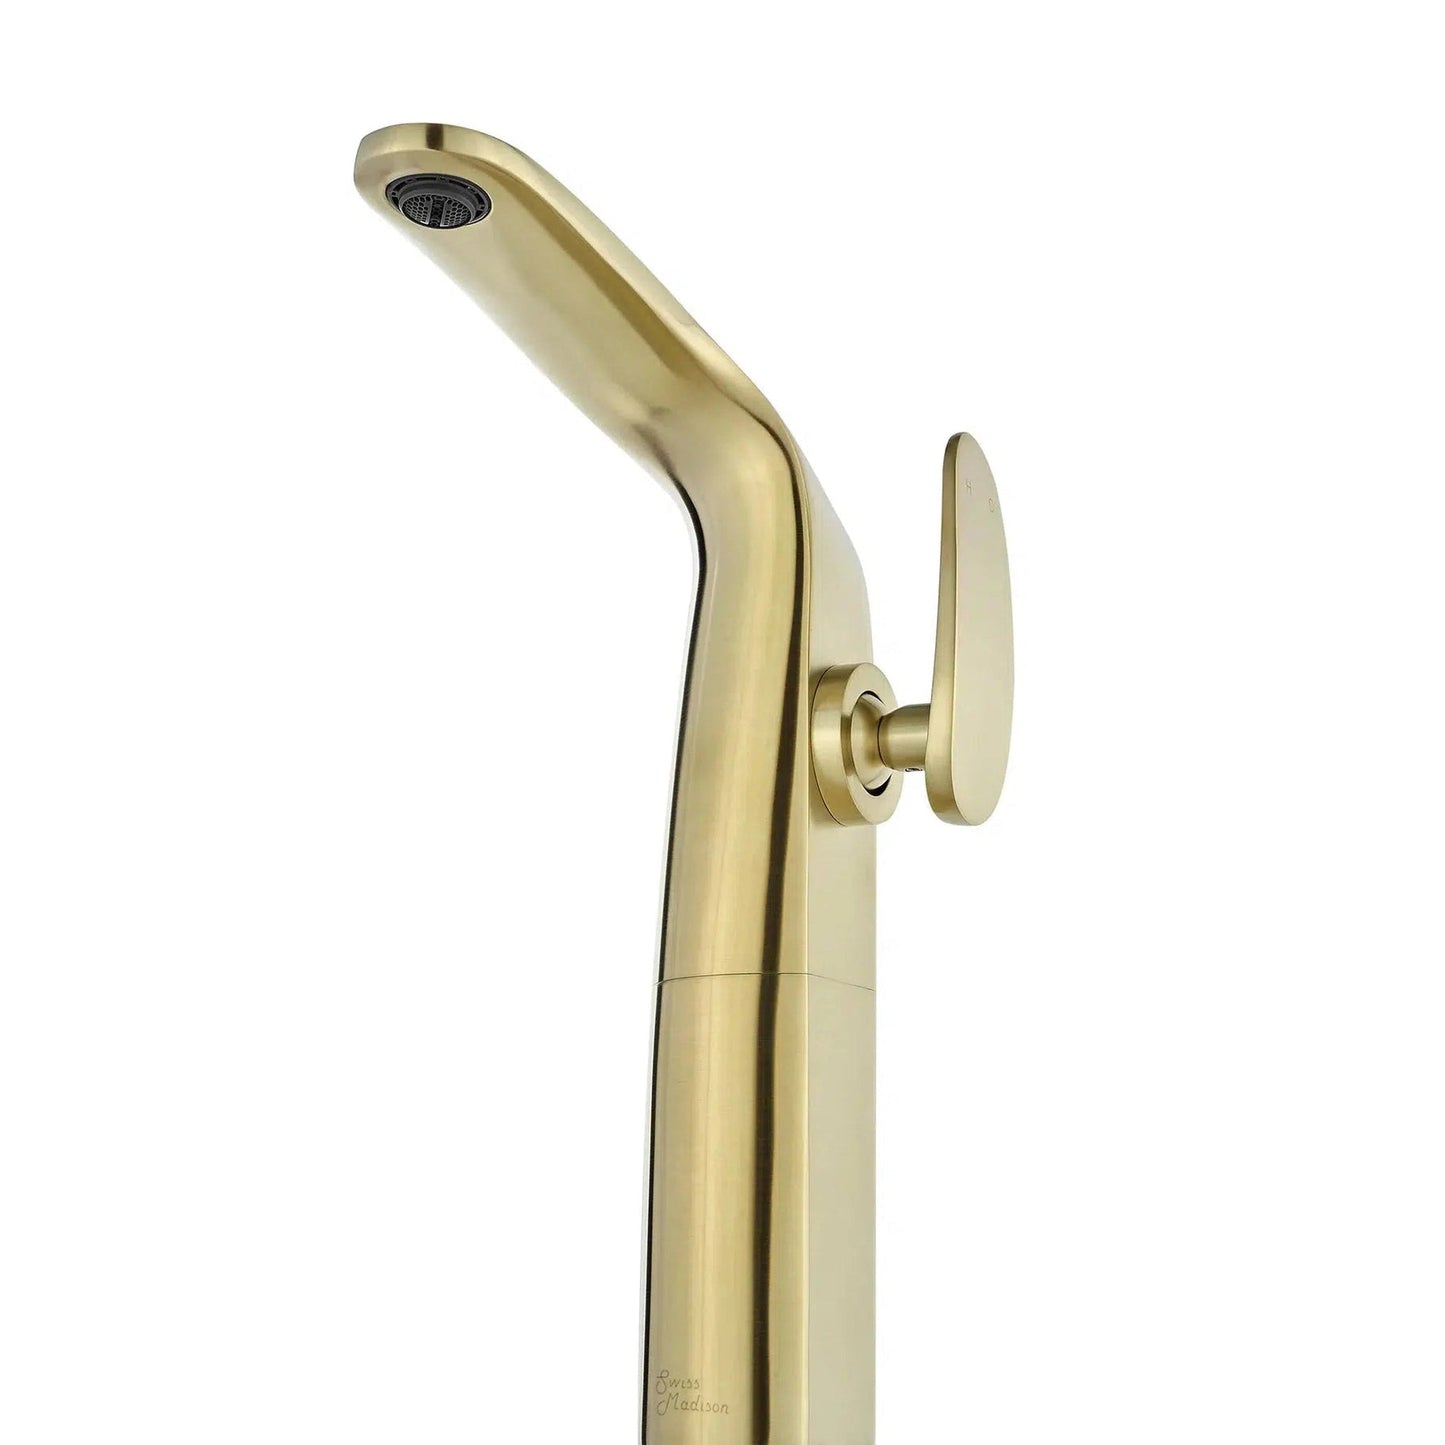 Swiss Madison Château 12" Brushed Gold Single Hole Bathroom Faucet With Flow Rate of 1.2 GPM